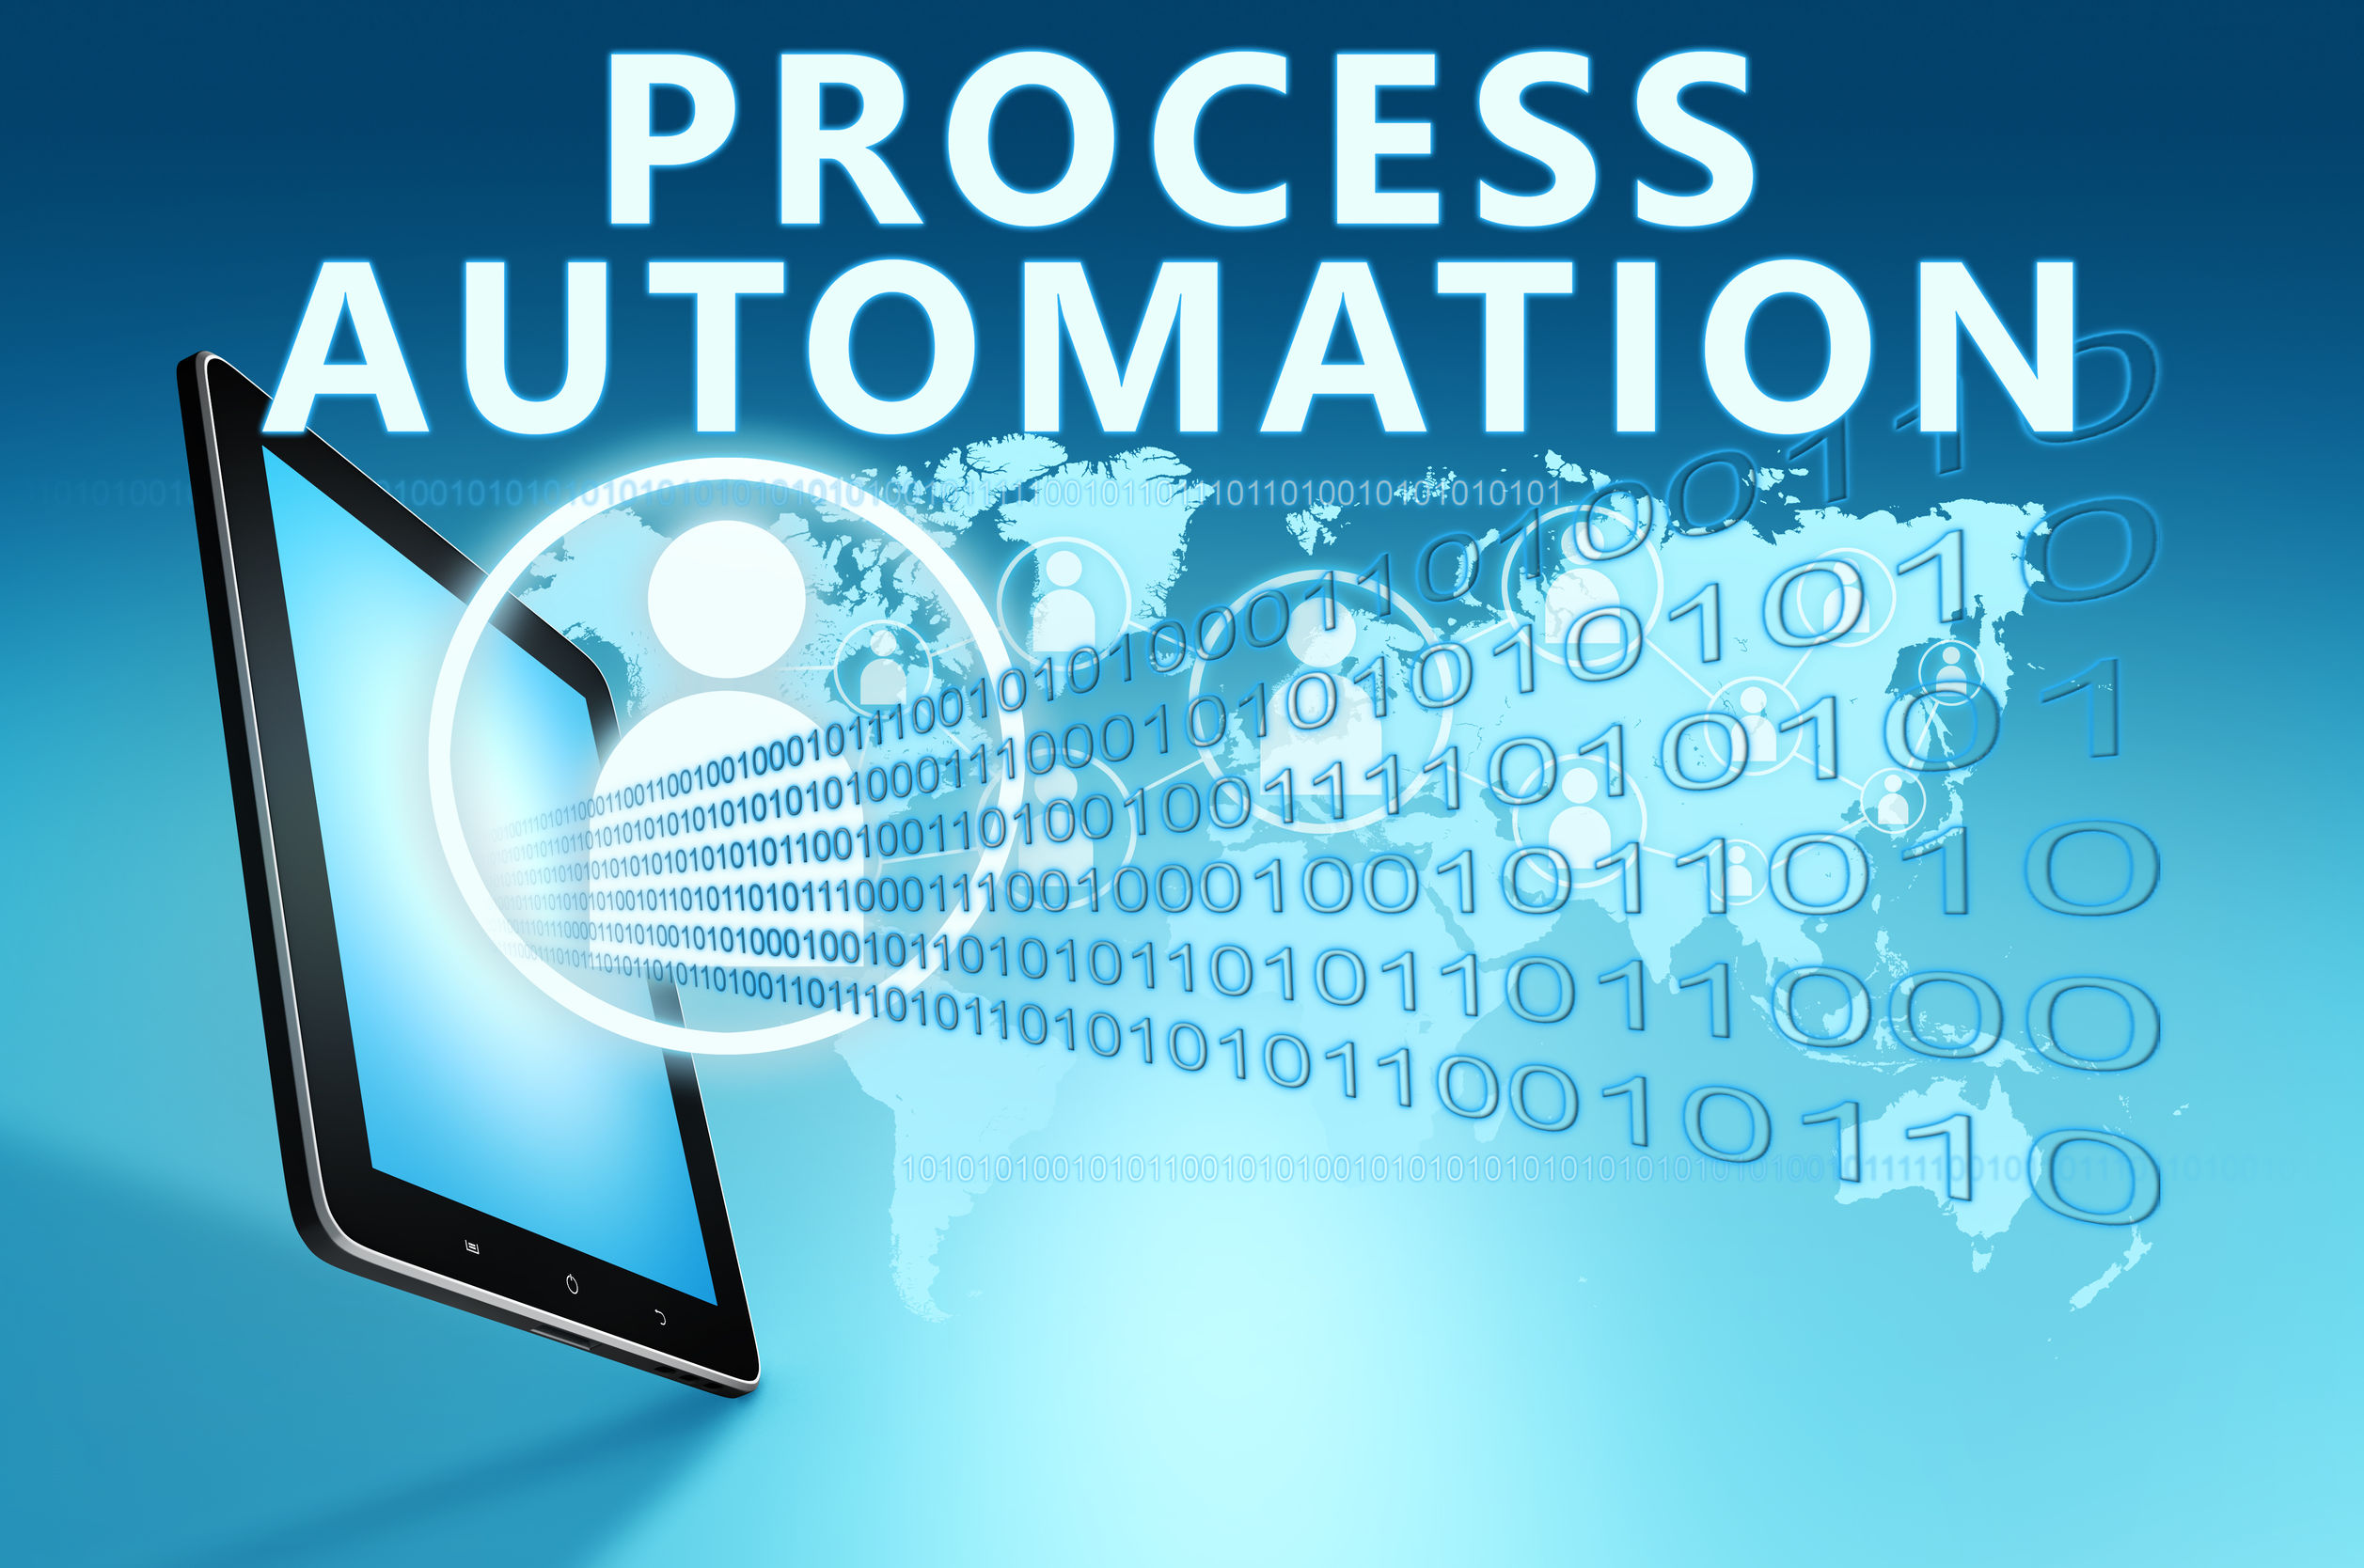 7 Tips to Help Your SMB Improve Efficiencies with ERP Process Automation